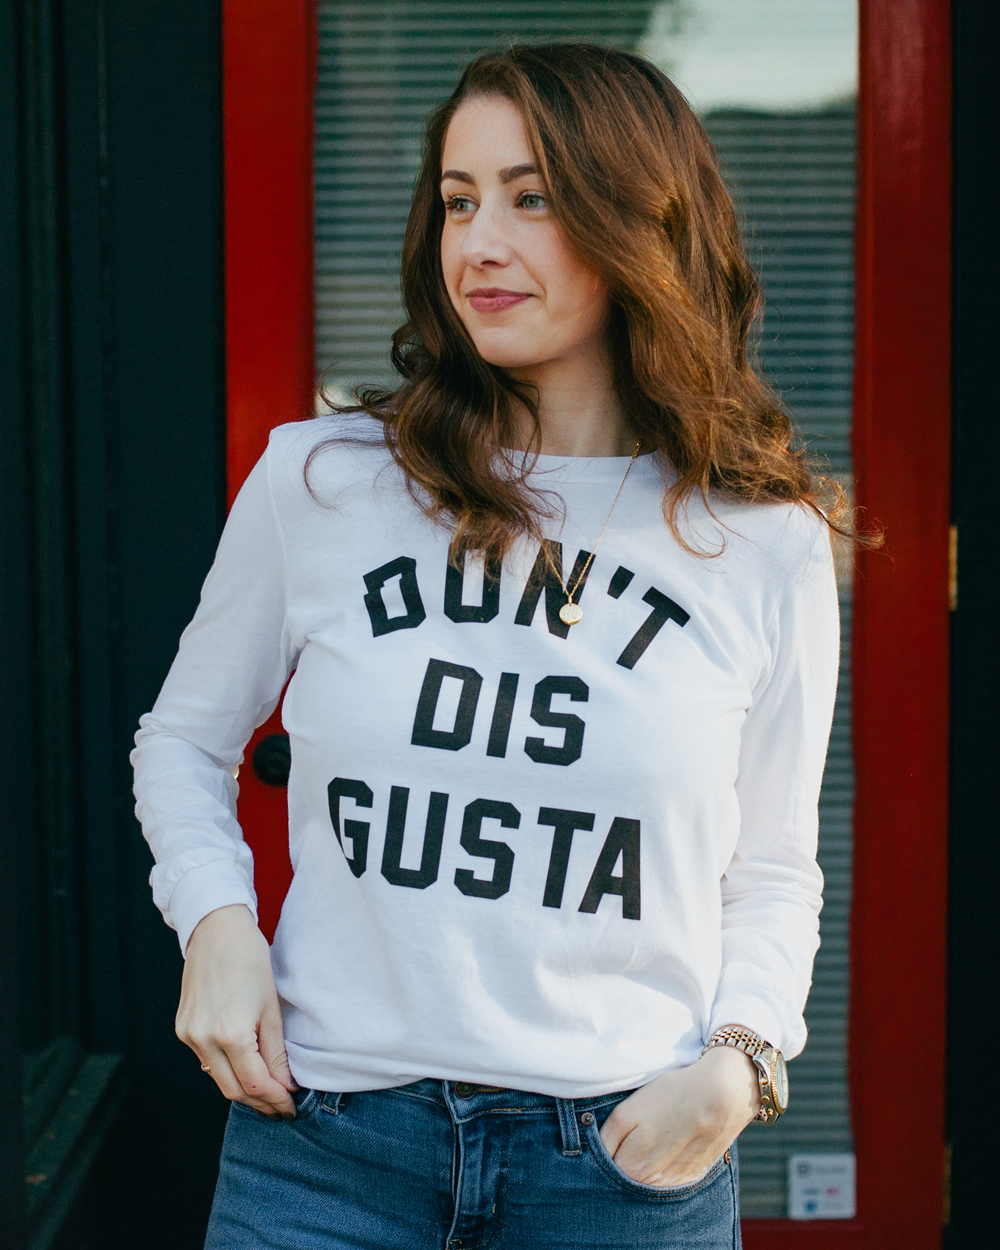 Woman wearing white long sleeve Don't Dis Gusta shirt with jeans